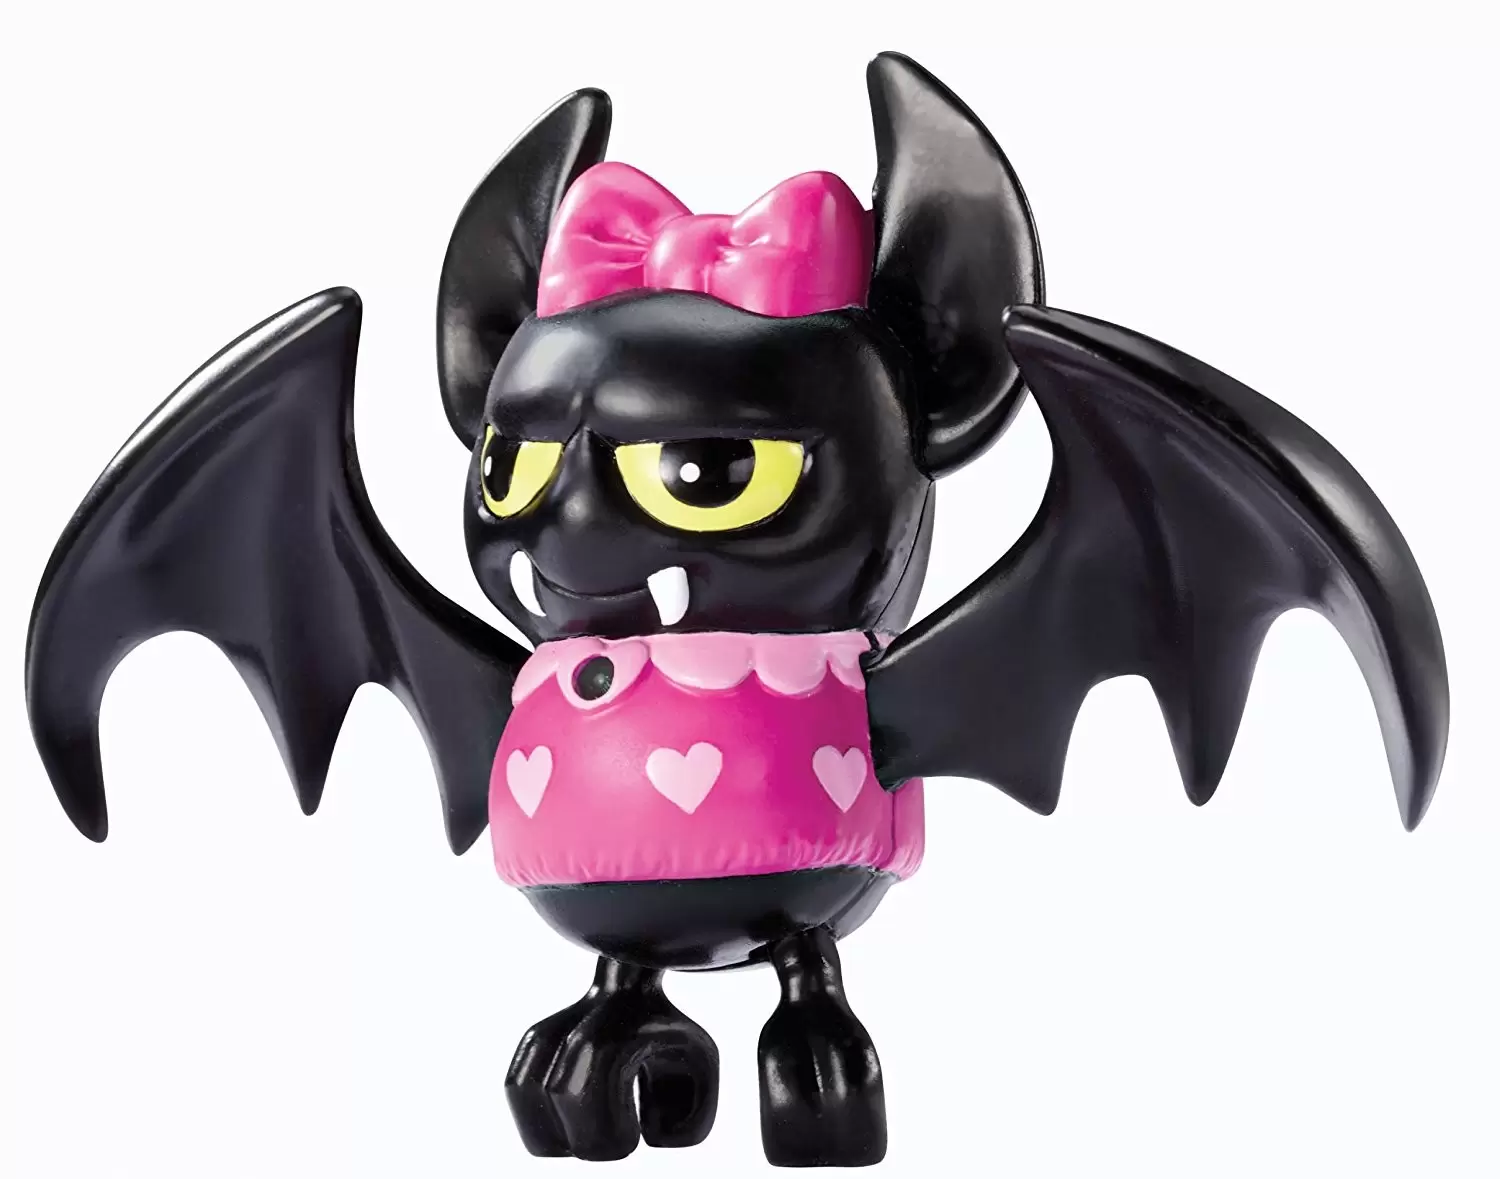 Monster High - Count Fabulous - Secret Creepers